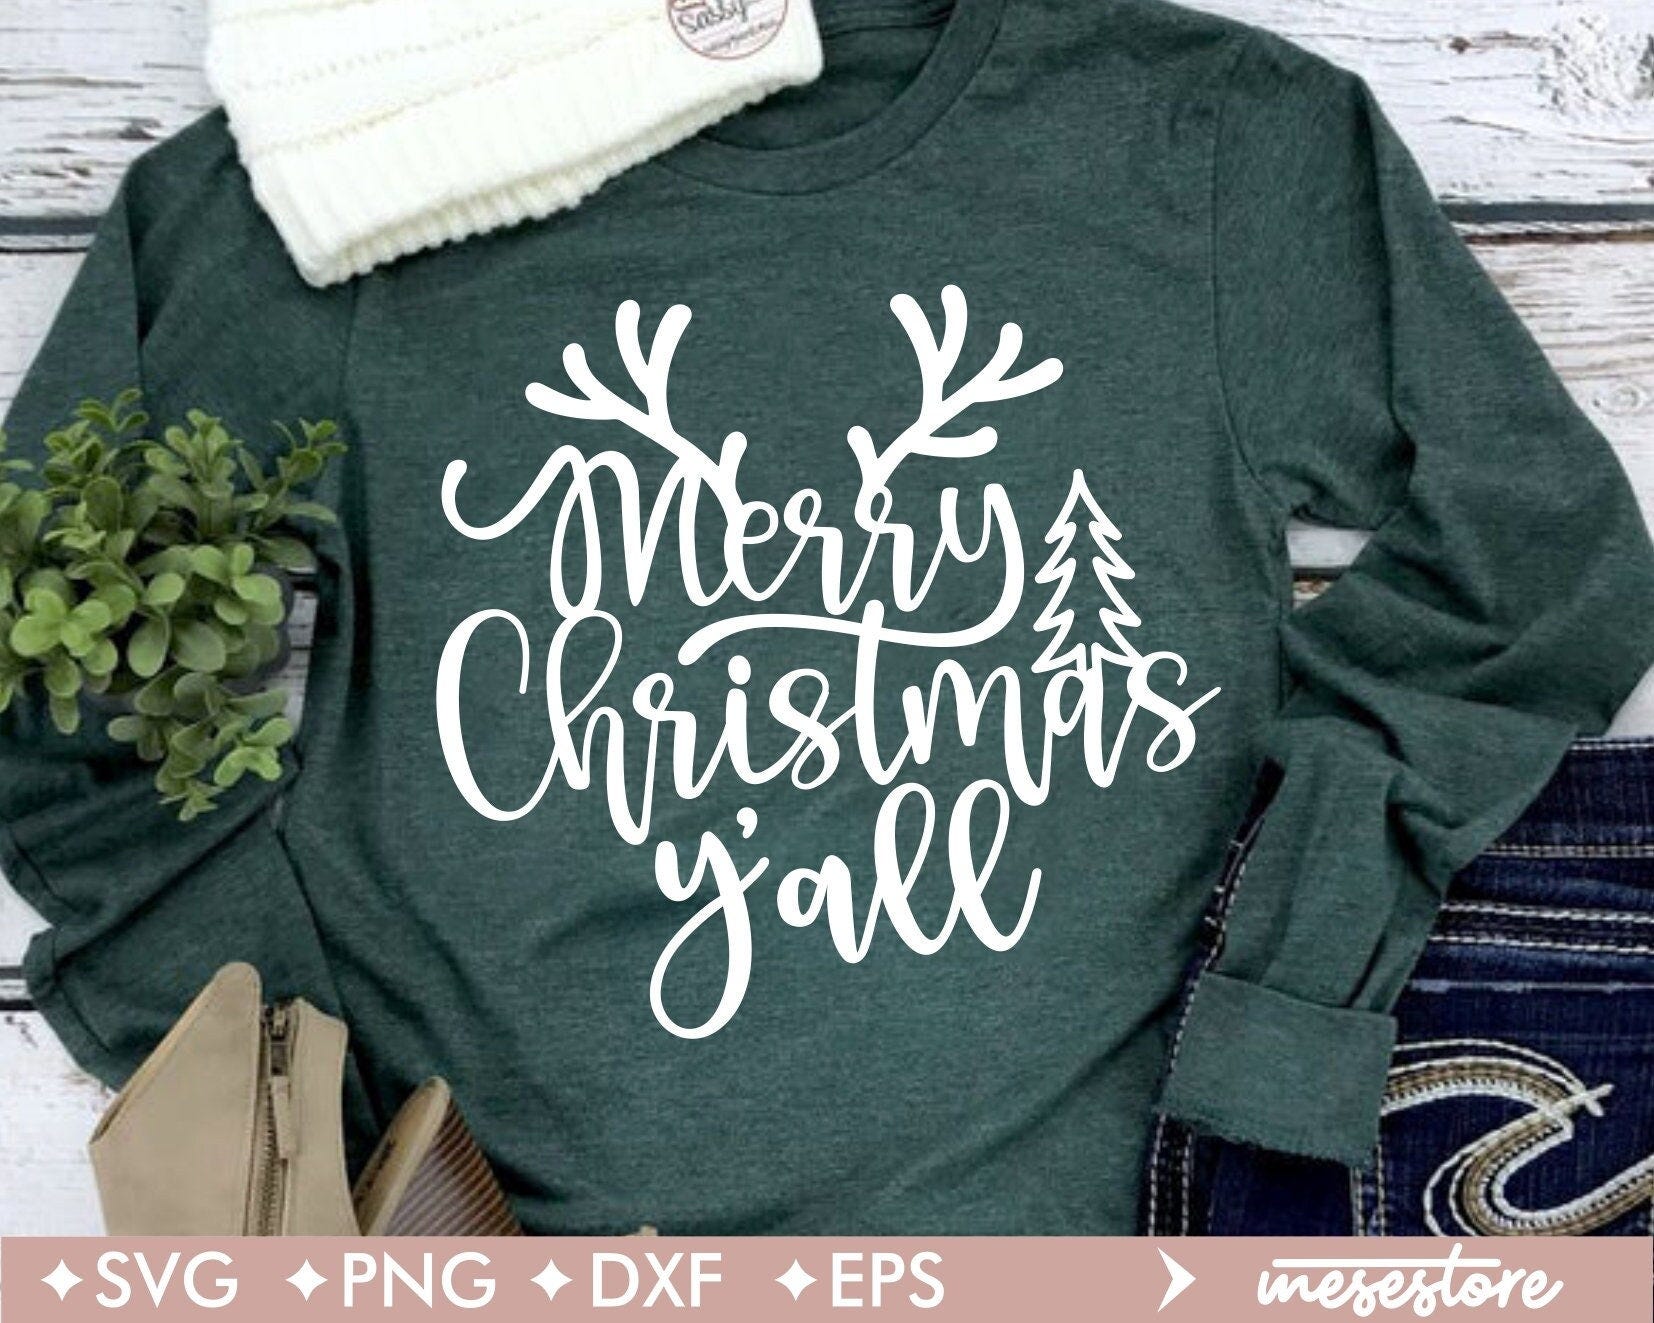 Merry Christmas yall SVG File, svg dxf eps png Files for Cutting Machines Cameo Cricut, Rustic Christmas SVG, Antlers SVG File, Reindeer Svg